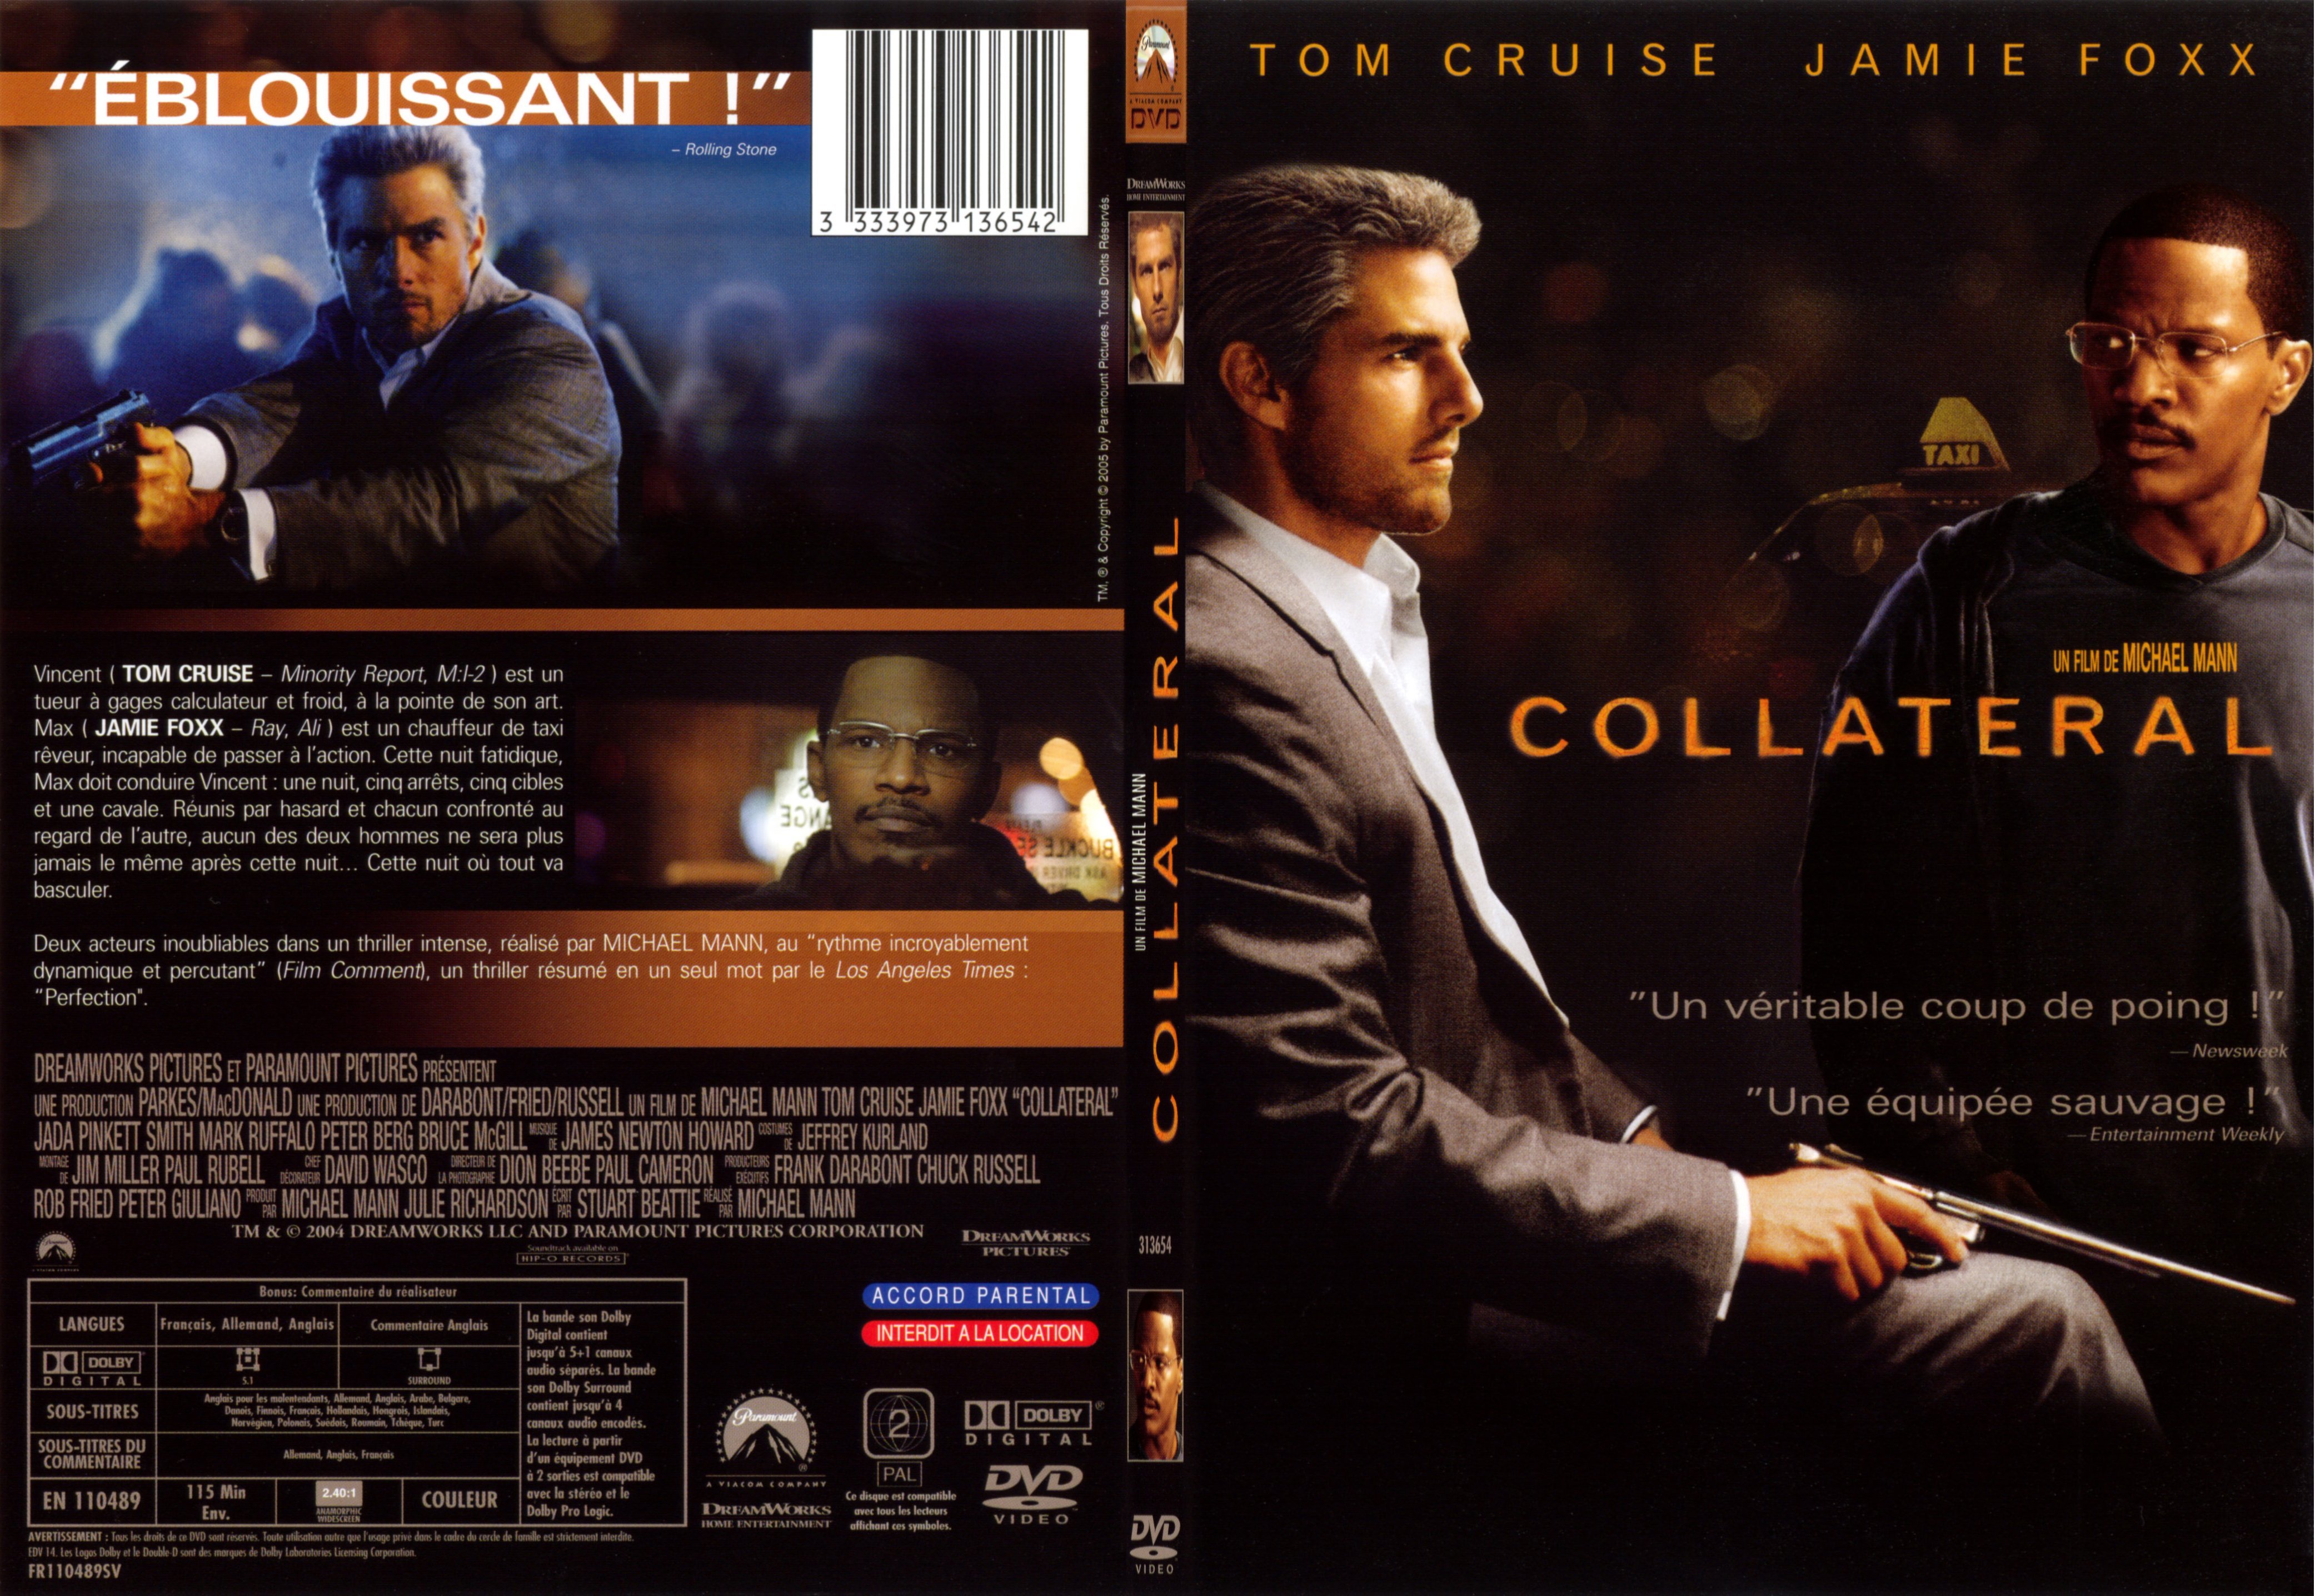 Jaquette DVD Collateral - SLIM v2